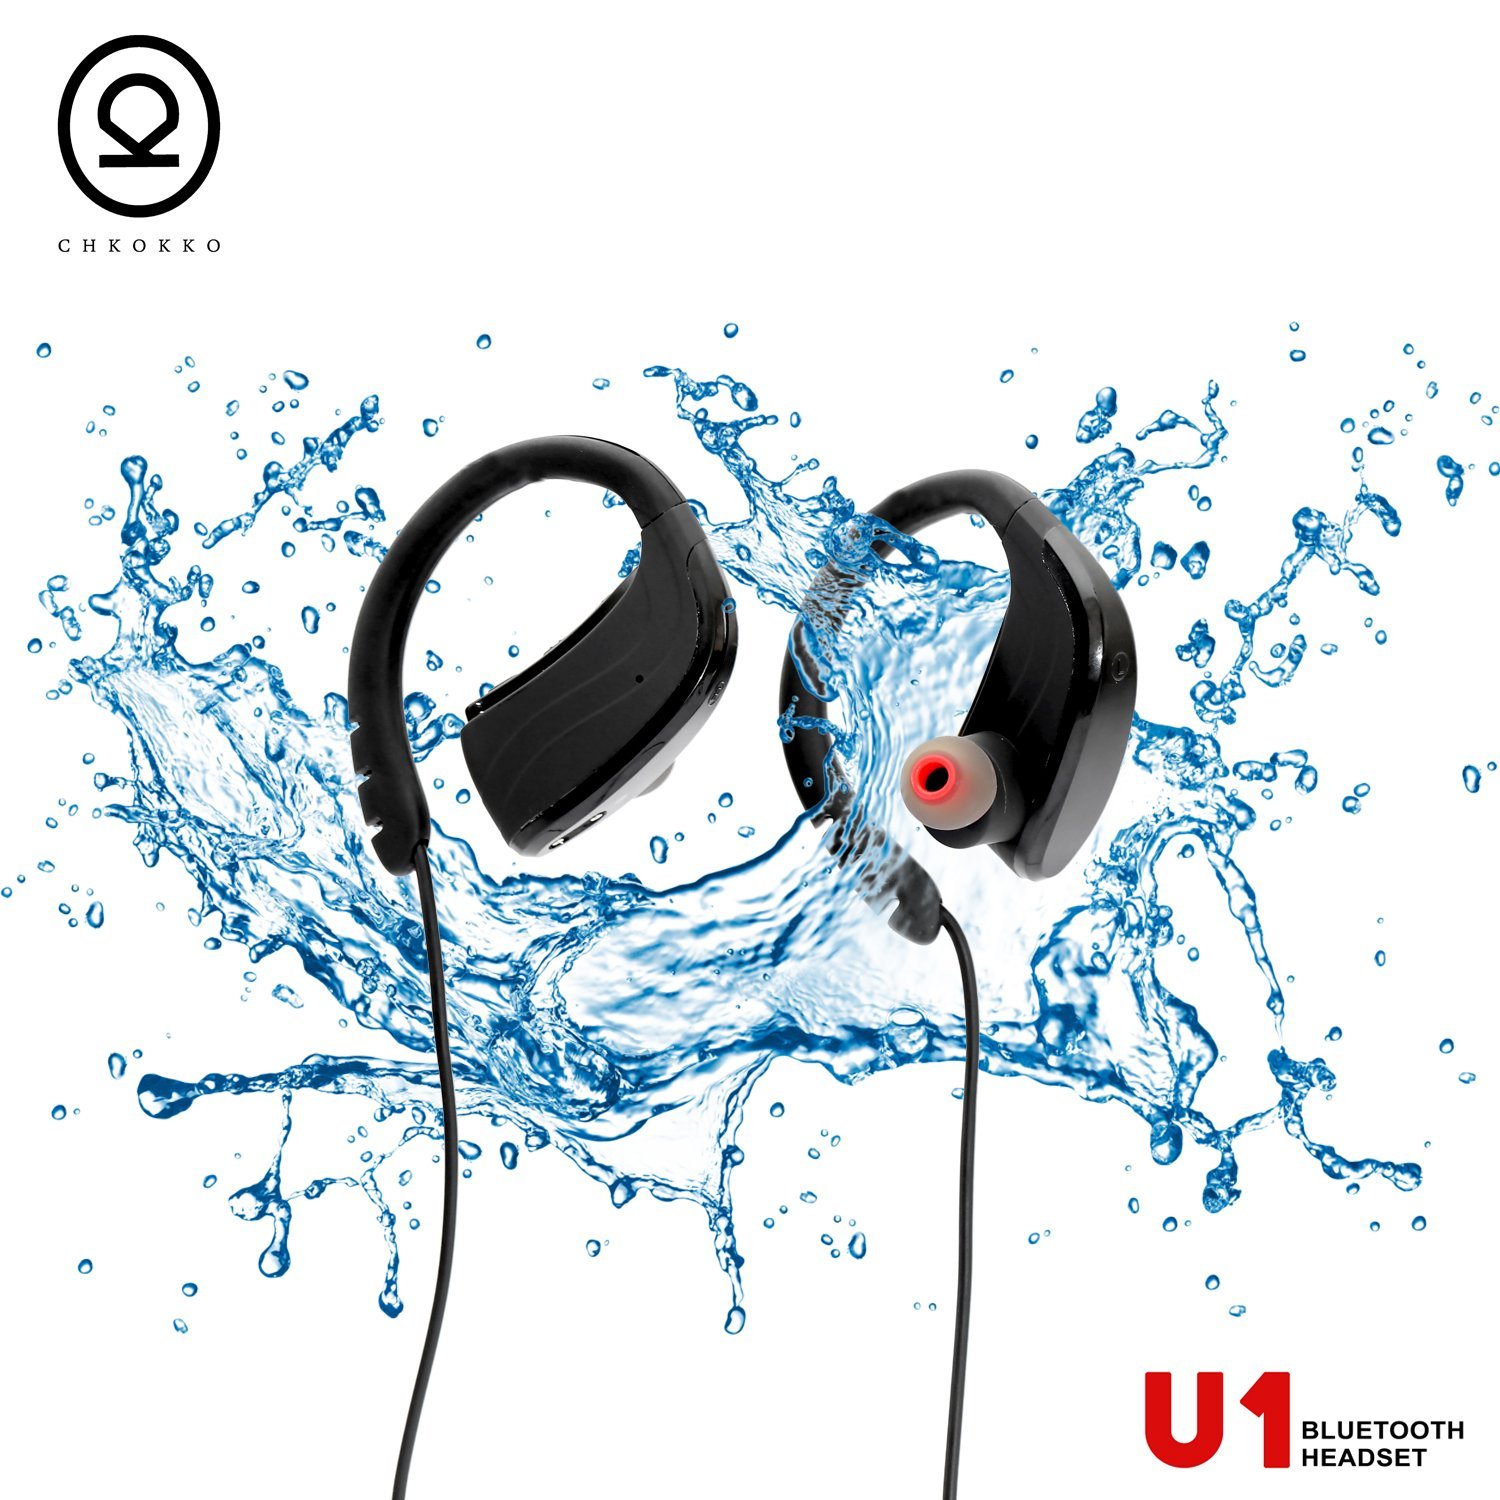 CHKOKKO U1 Bluetooth Headphones, Best Wireless Sports Earphones with Mic, IPX7 Waterproof Technology, HD Sound with Bass, Noise Cancelling, up to 8 hours working time